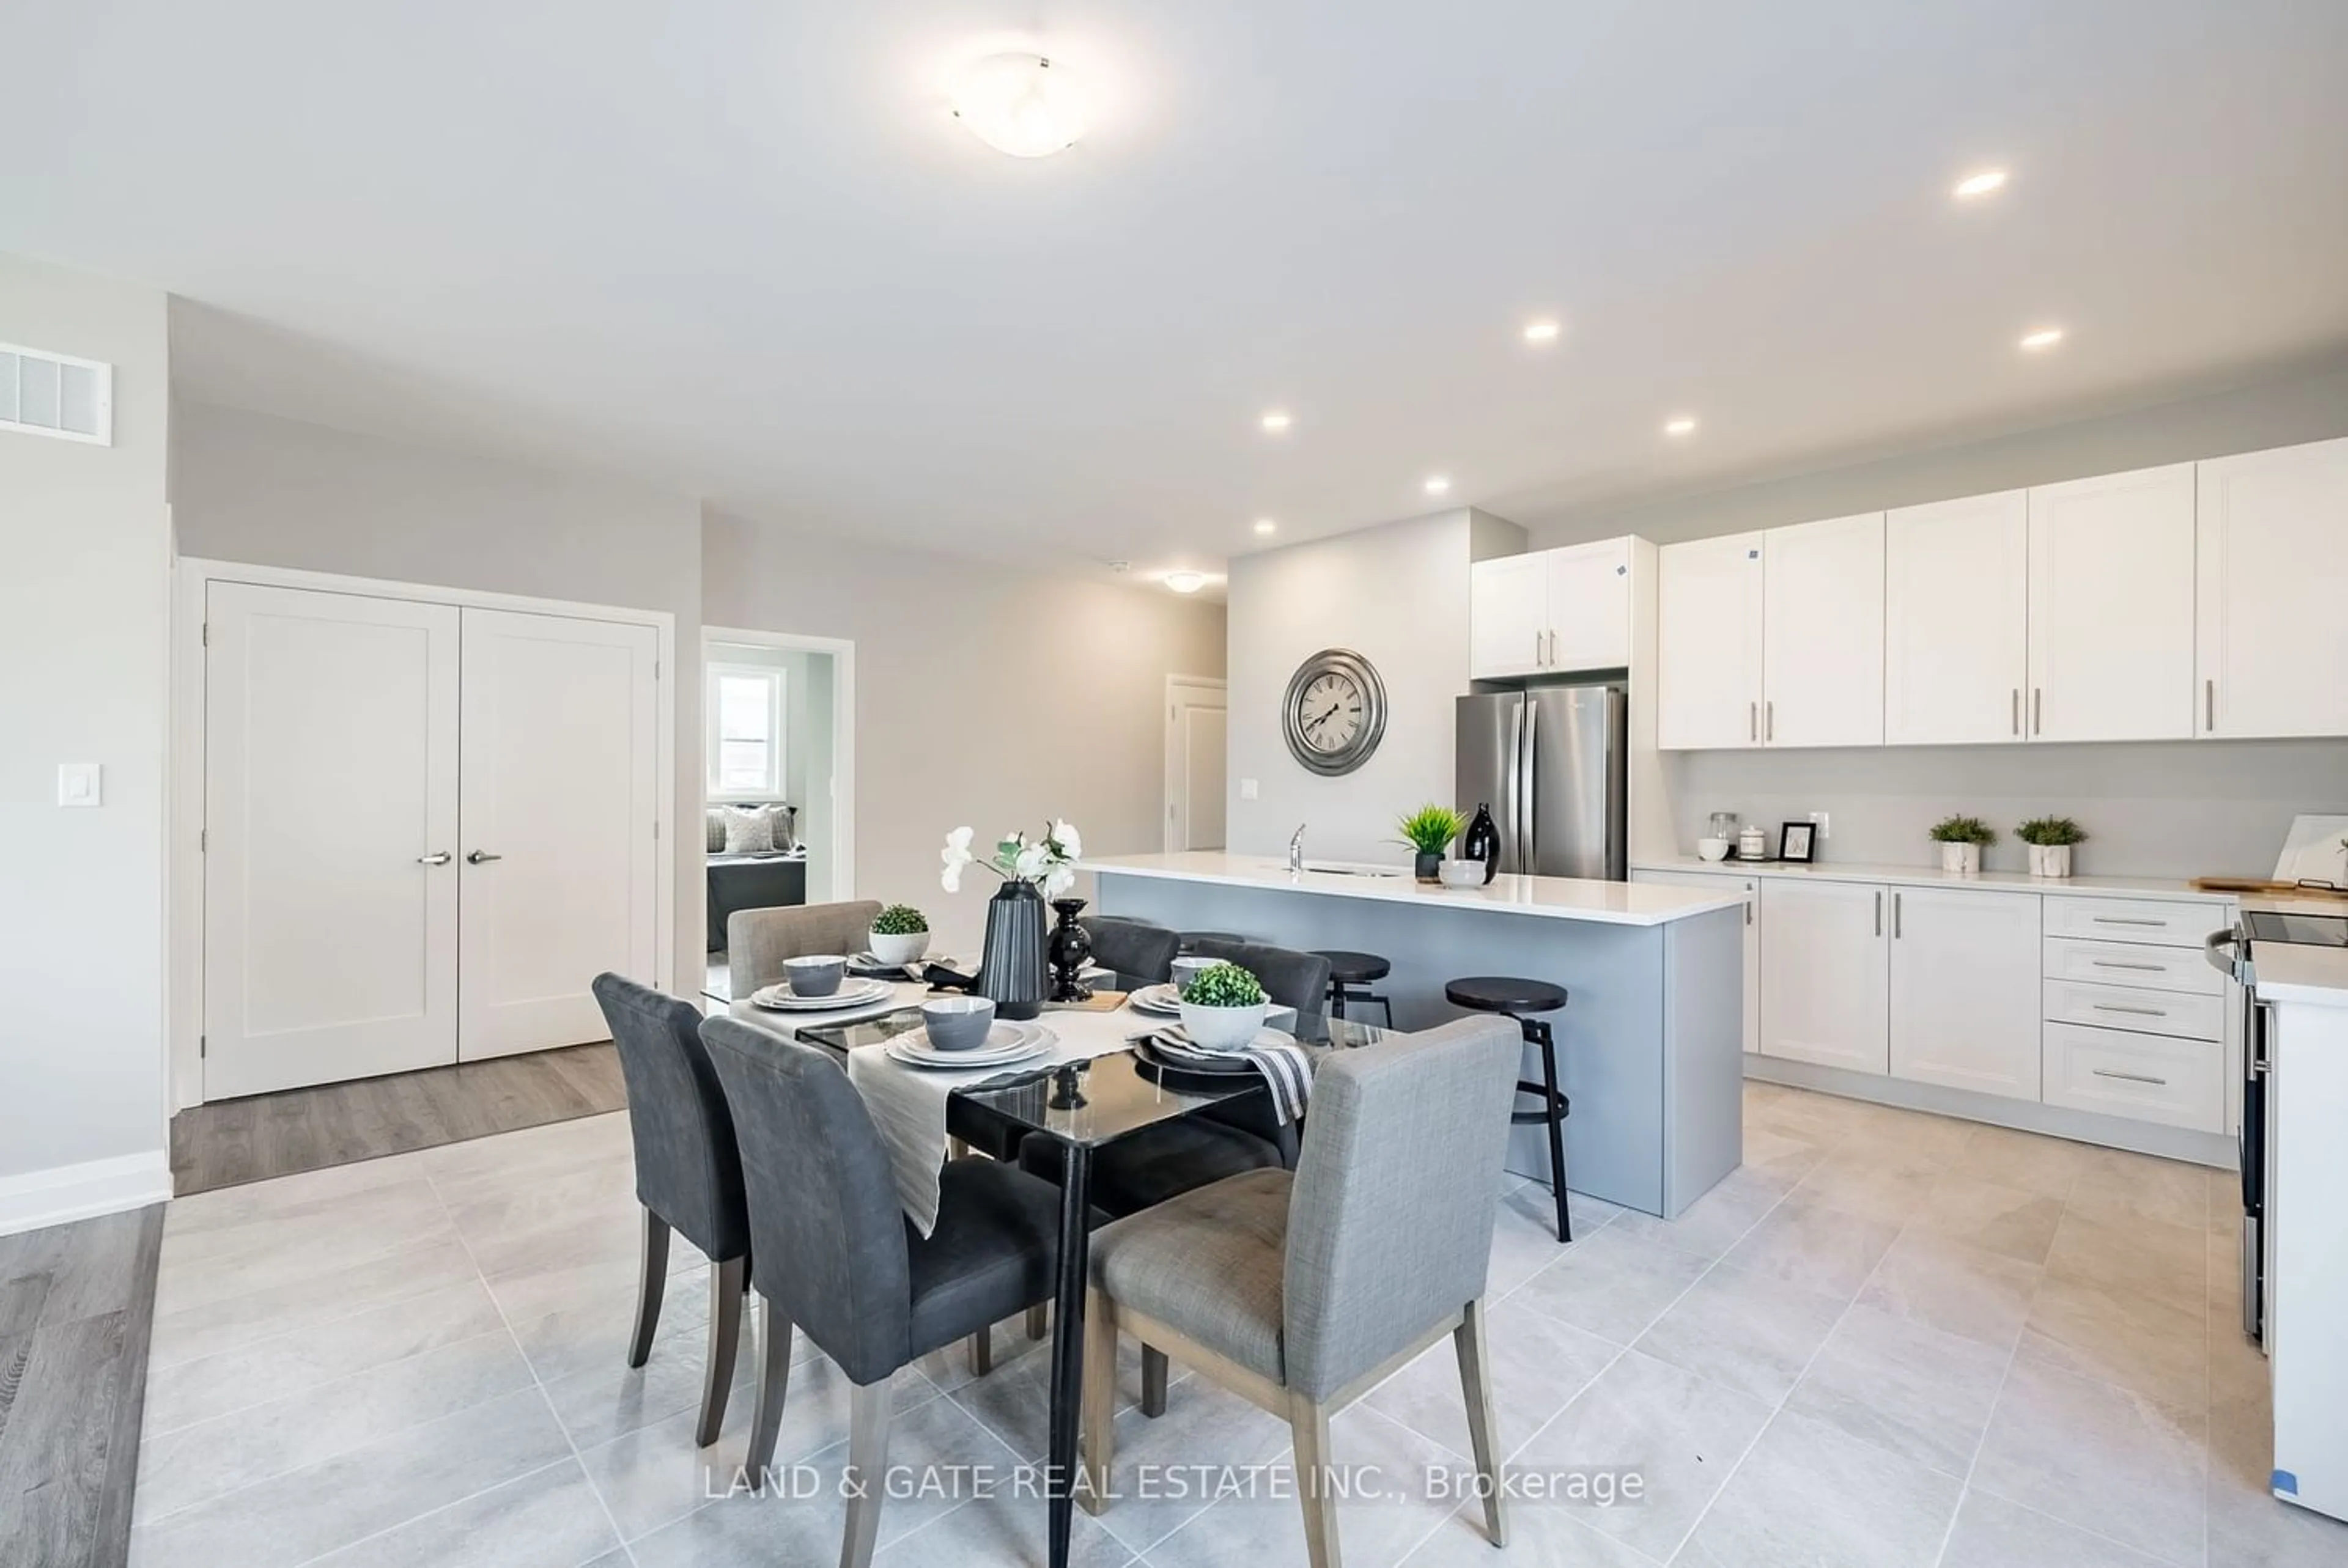 Contemporary kitchen for 127 Gibbons St, Oshawa Ontario L1J 4Y1